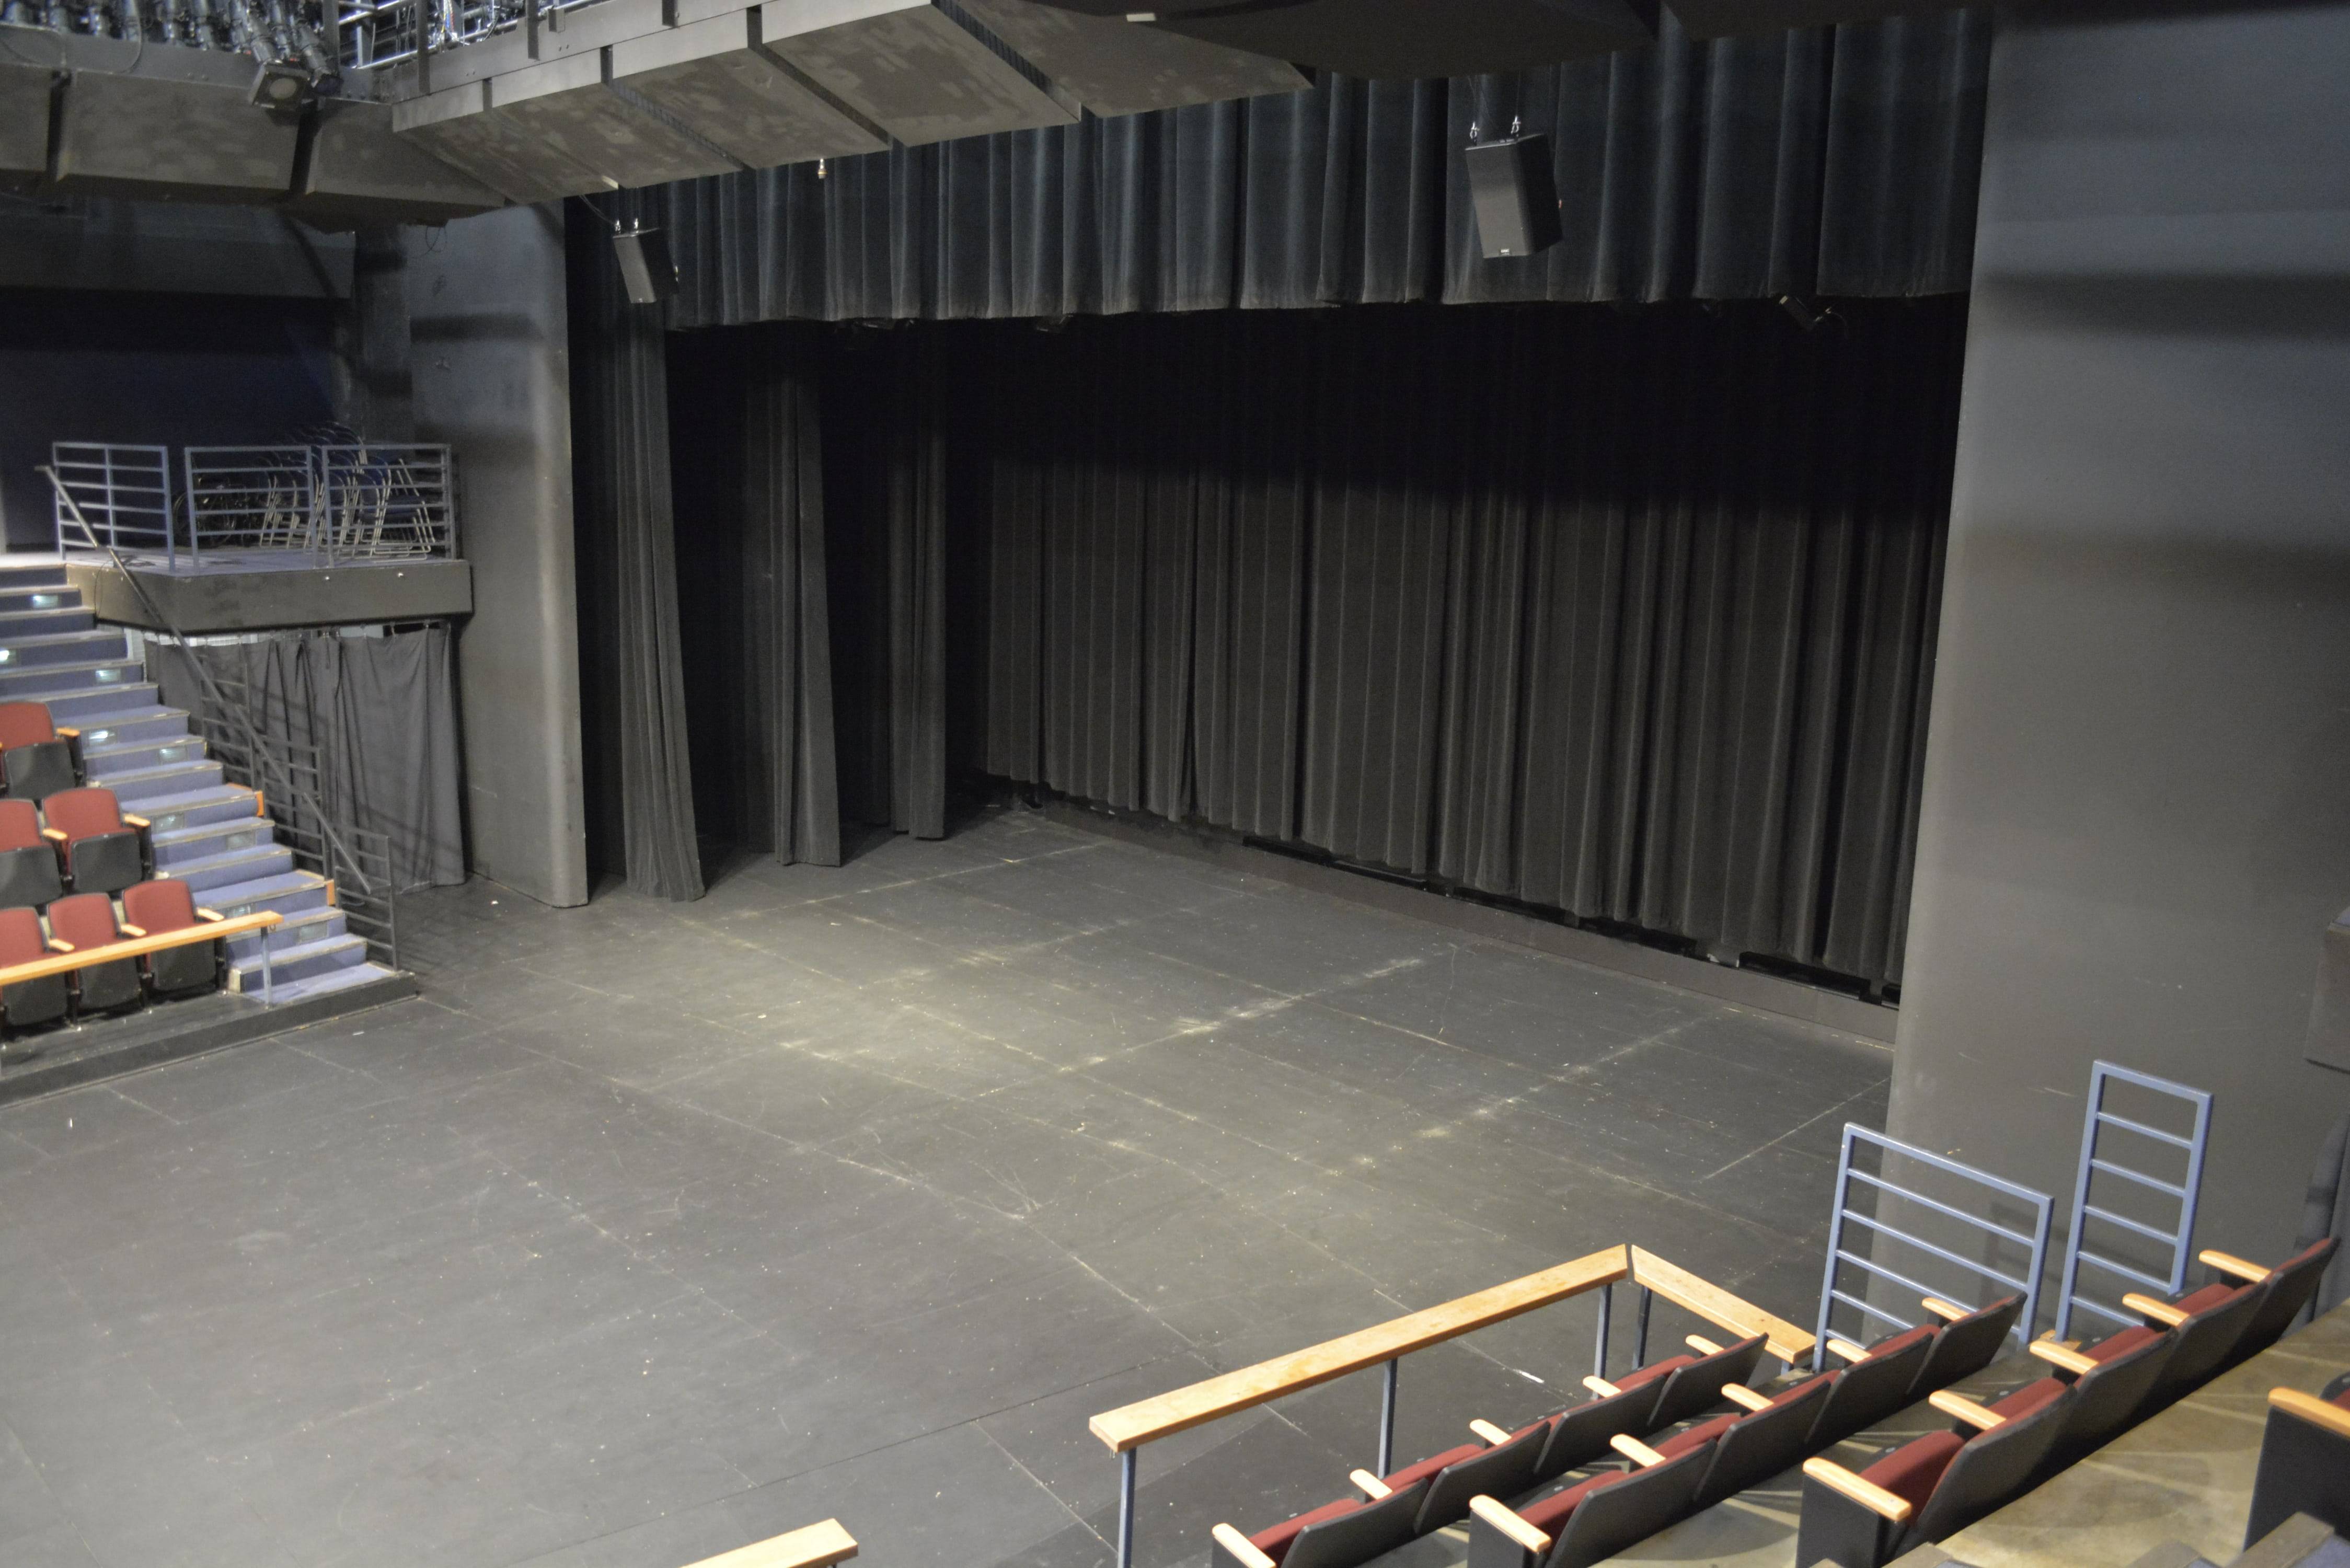 Mainstage Theatre stage area